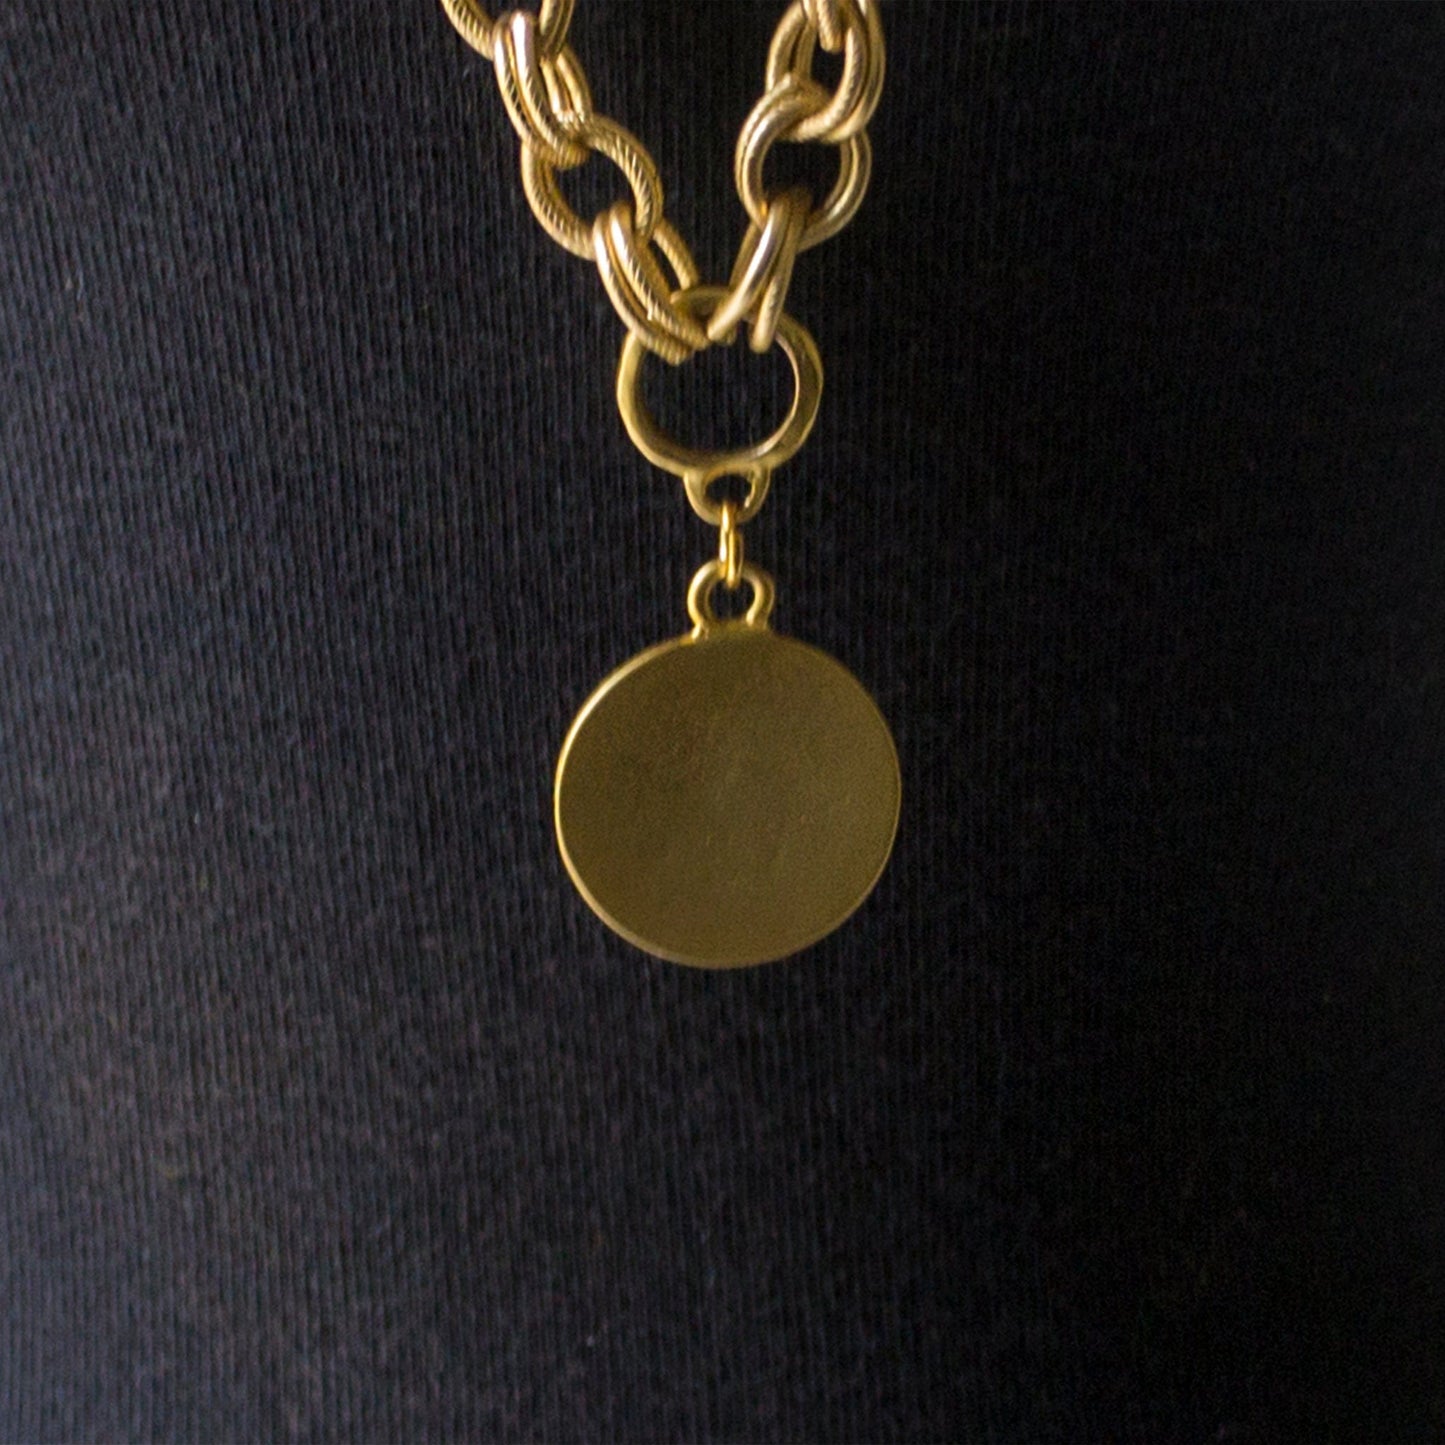 Coin Charm necklace Jewelry